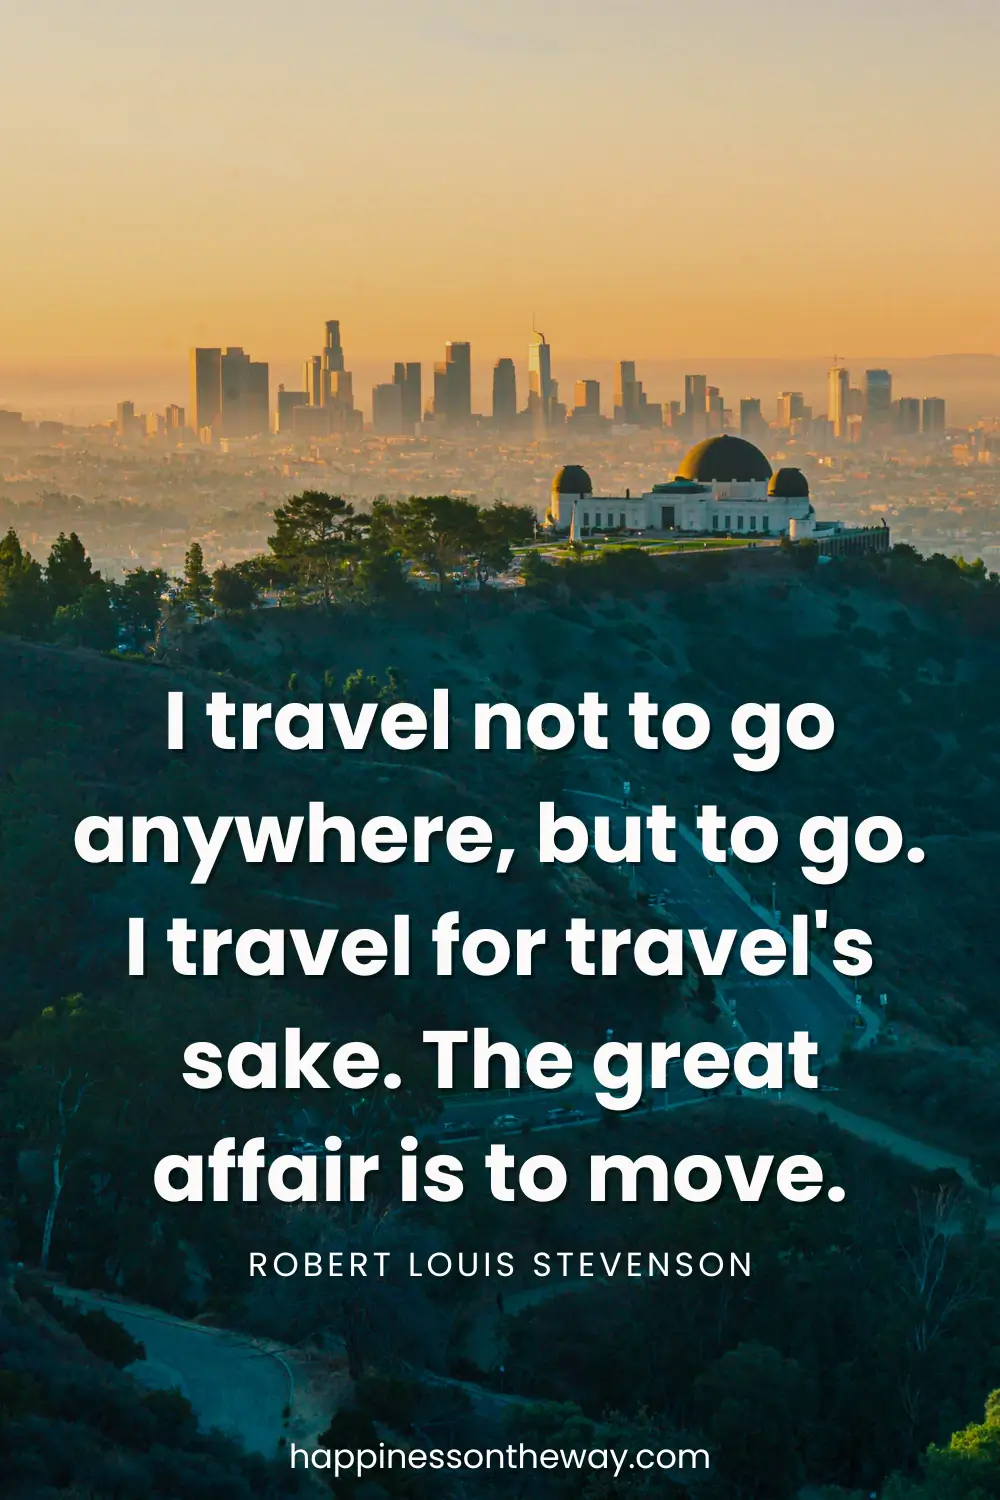 A hiking trail to the Griffith Observatory overlooking the buildings of Los Angeles with a quote: 'I travel not to go anywhere, but to go. I travel for travel's sake. The great affair is to move.' by Robert Louis Stevenson